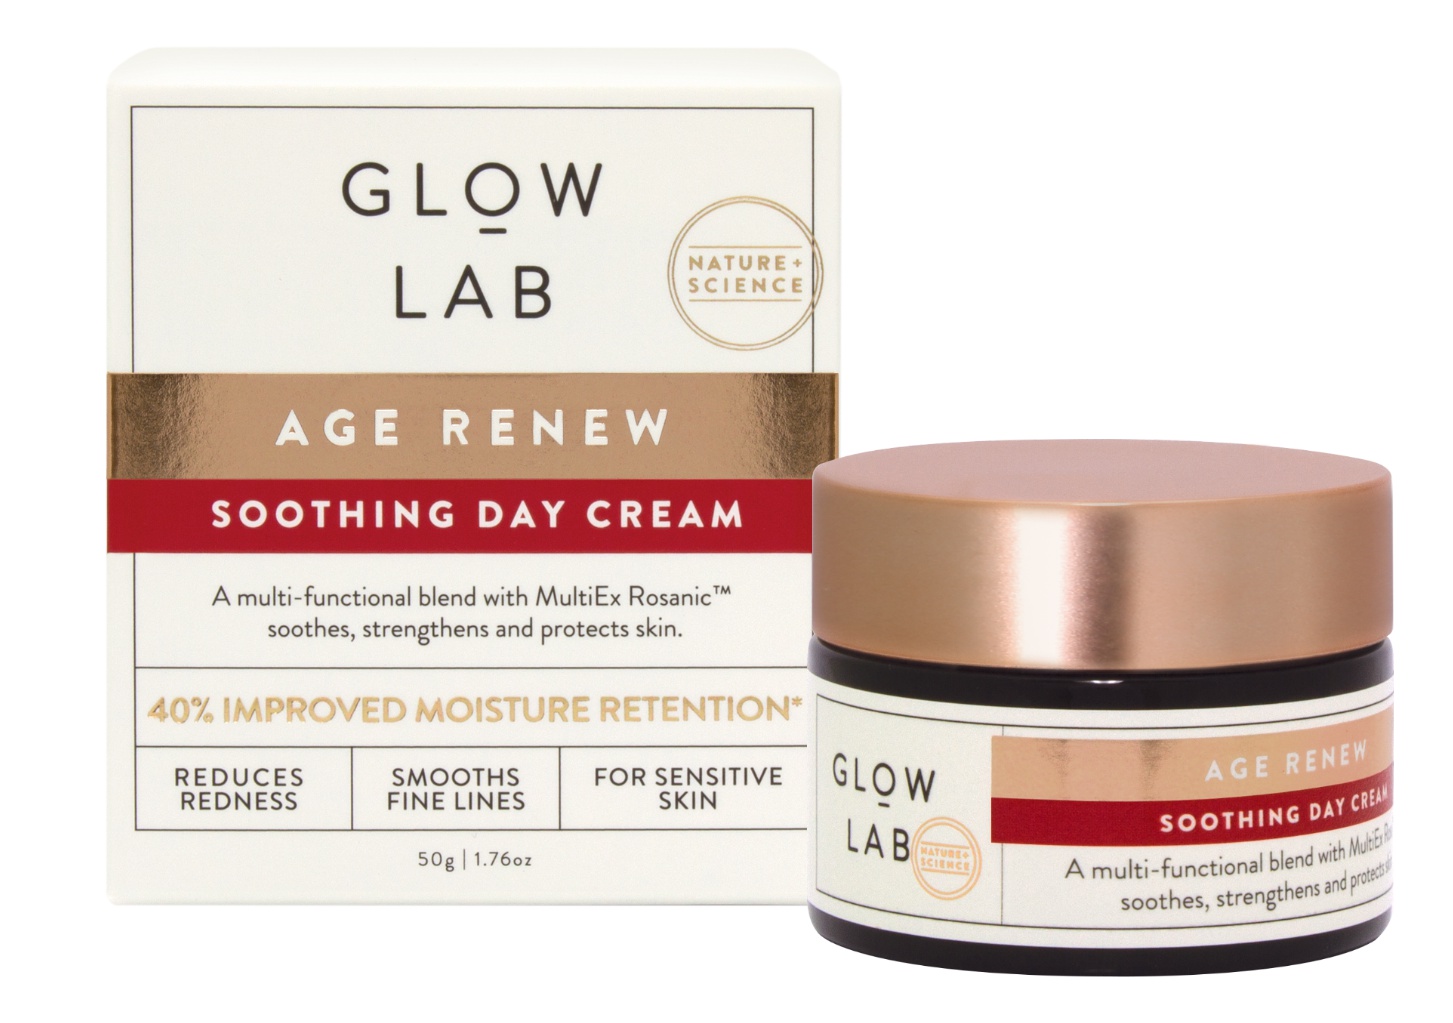 Glow Lab Age Renew Soothing Day Cream